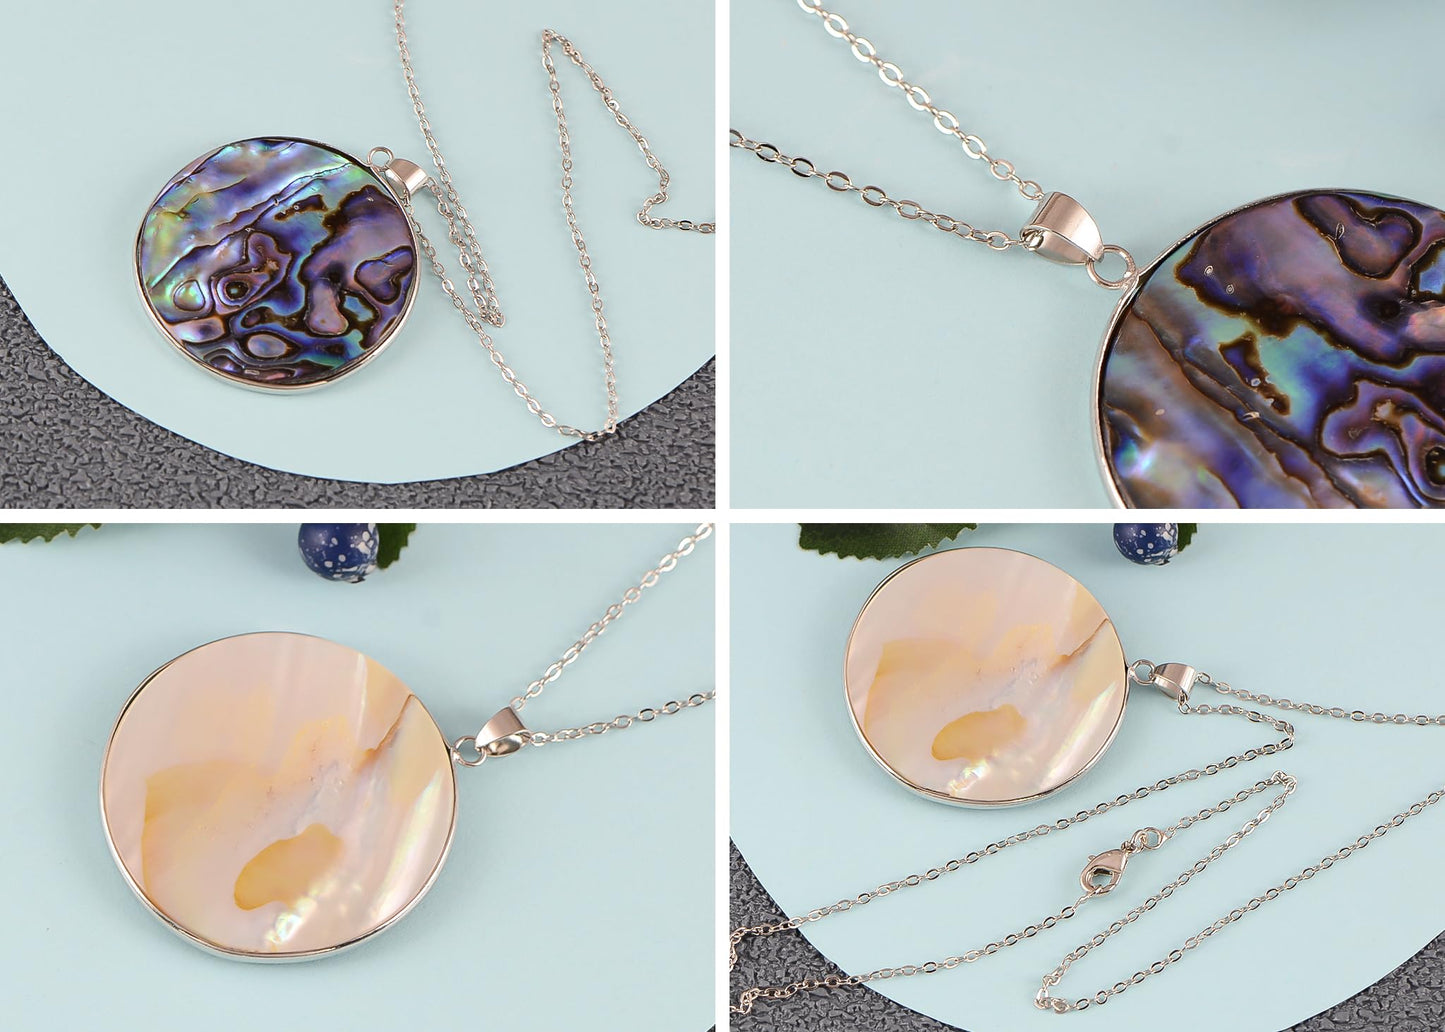 Alilang Silvery Tone Natural Abalone Shell Waterdrop Round Shape Pendant Necklace